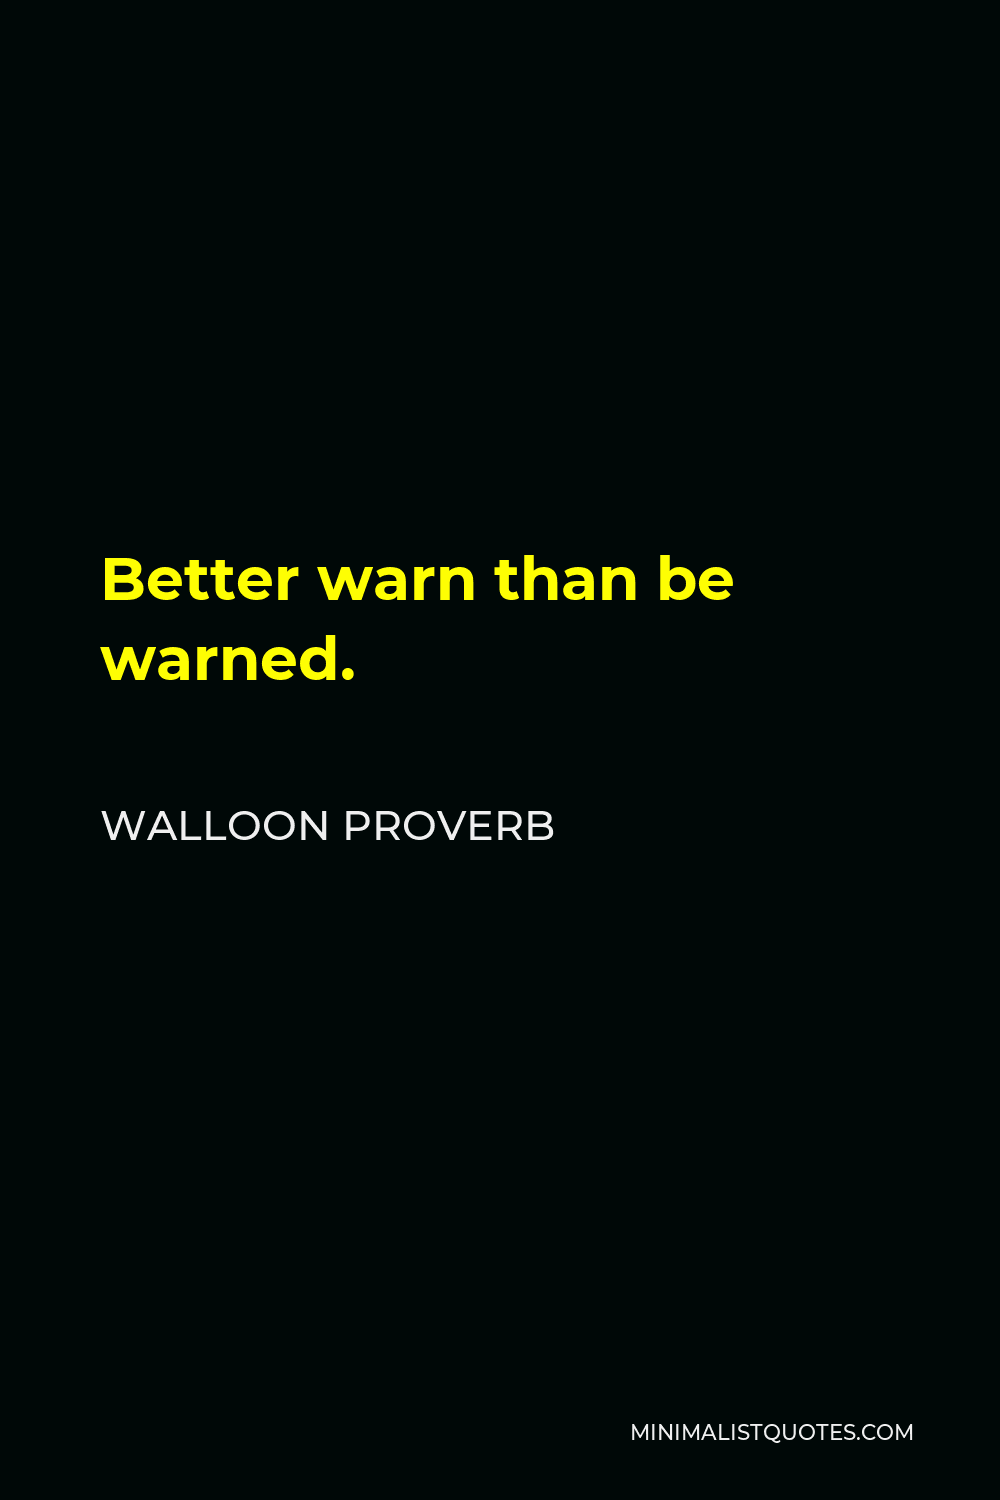 Walloon Proverb Quote - Better warn than be warned.